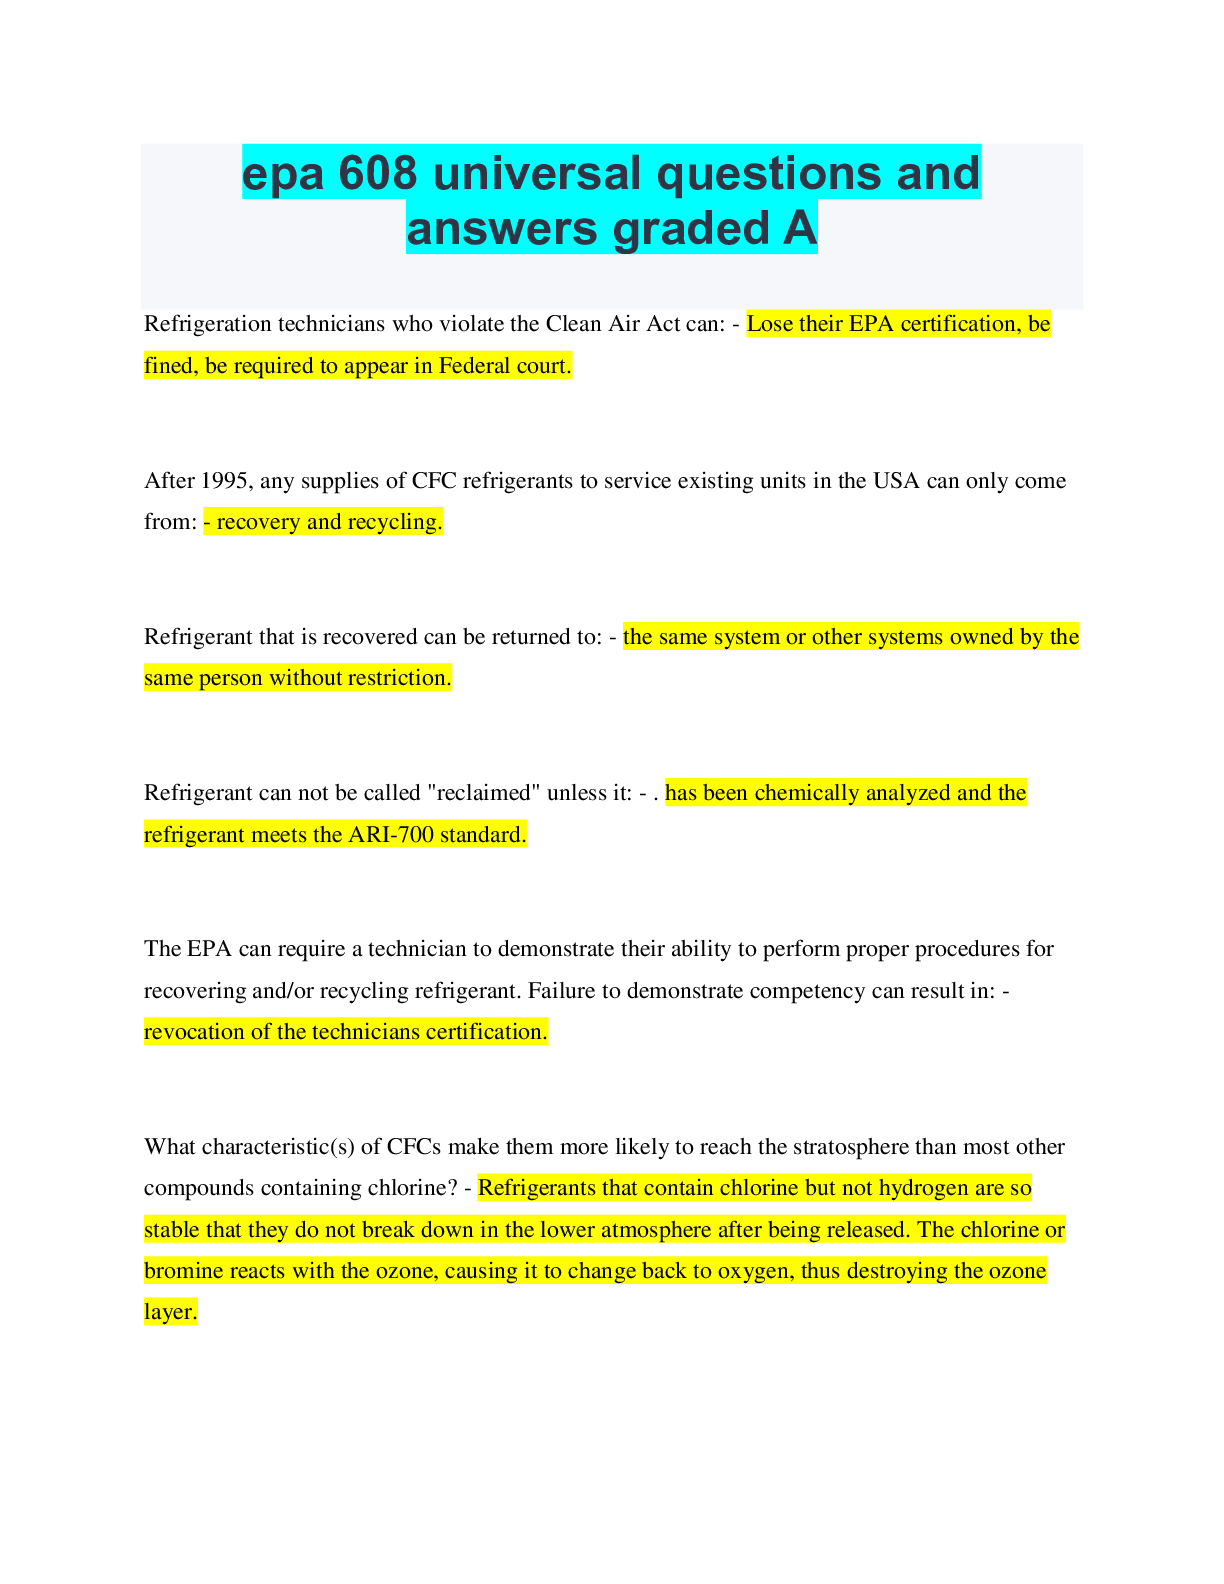 epa-608-universal-questions-and-answers-graded-a-browsegrades